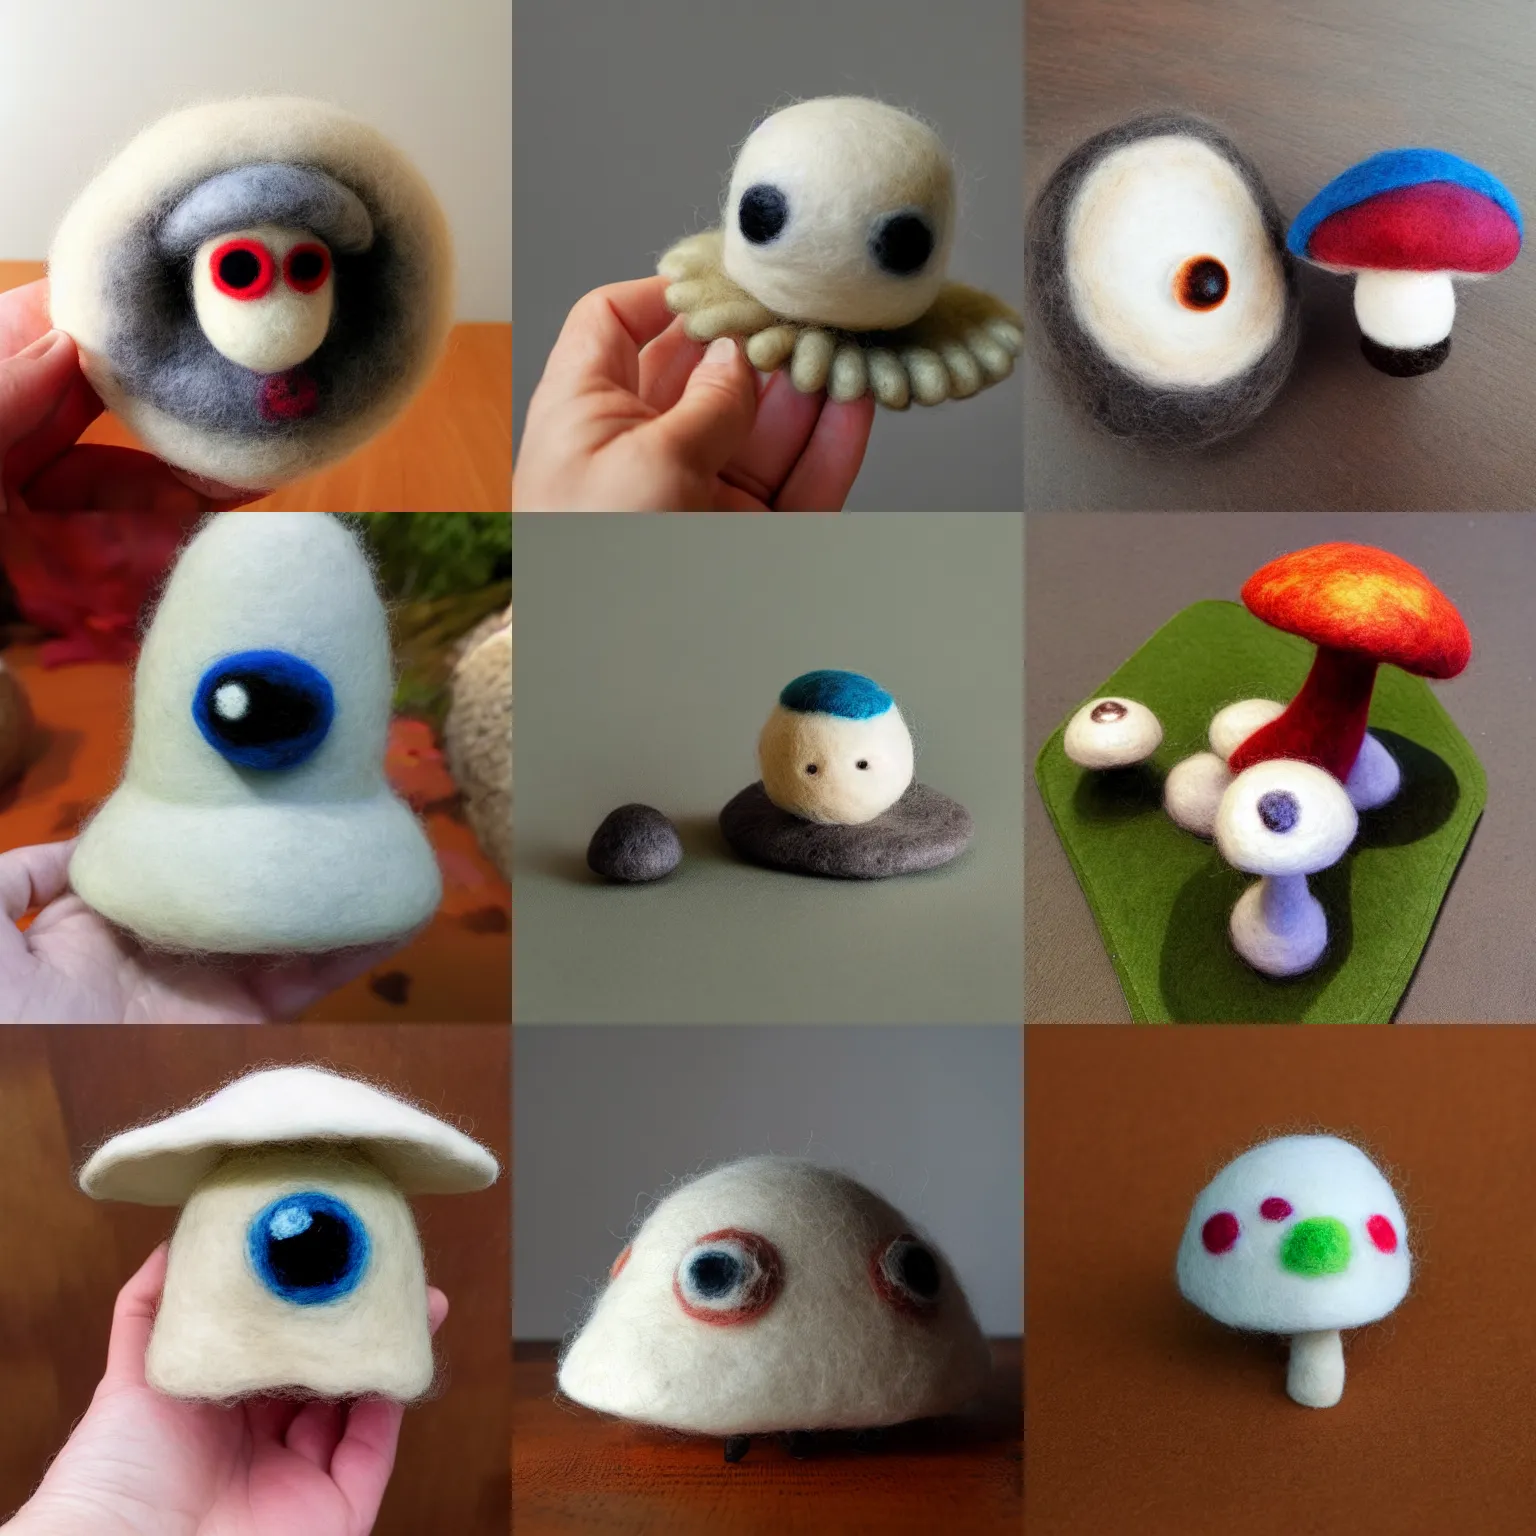 Prompt: photo of a needle felted wool mushroom figure with large eyes